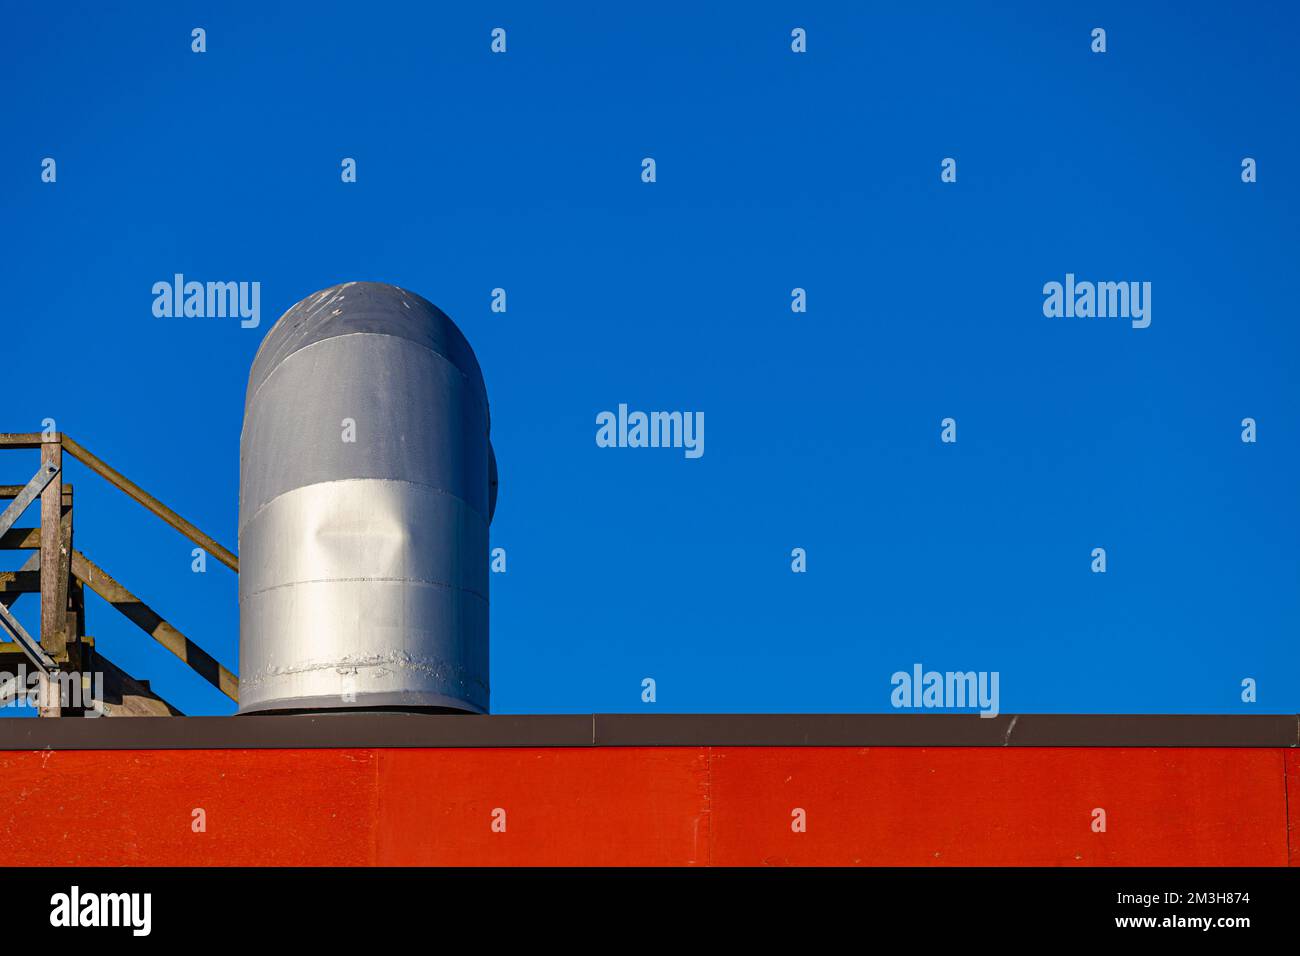 Abstract roofline image with vent stack in Steveston British Columbia Canada Stock Photo